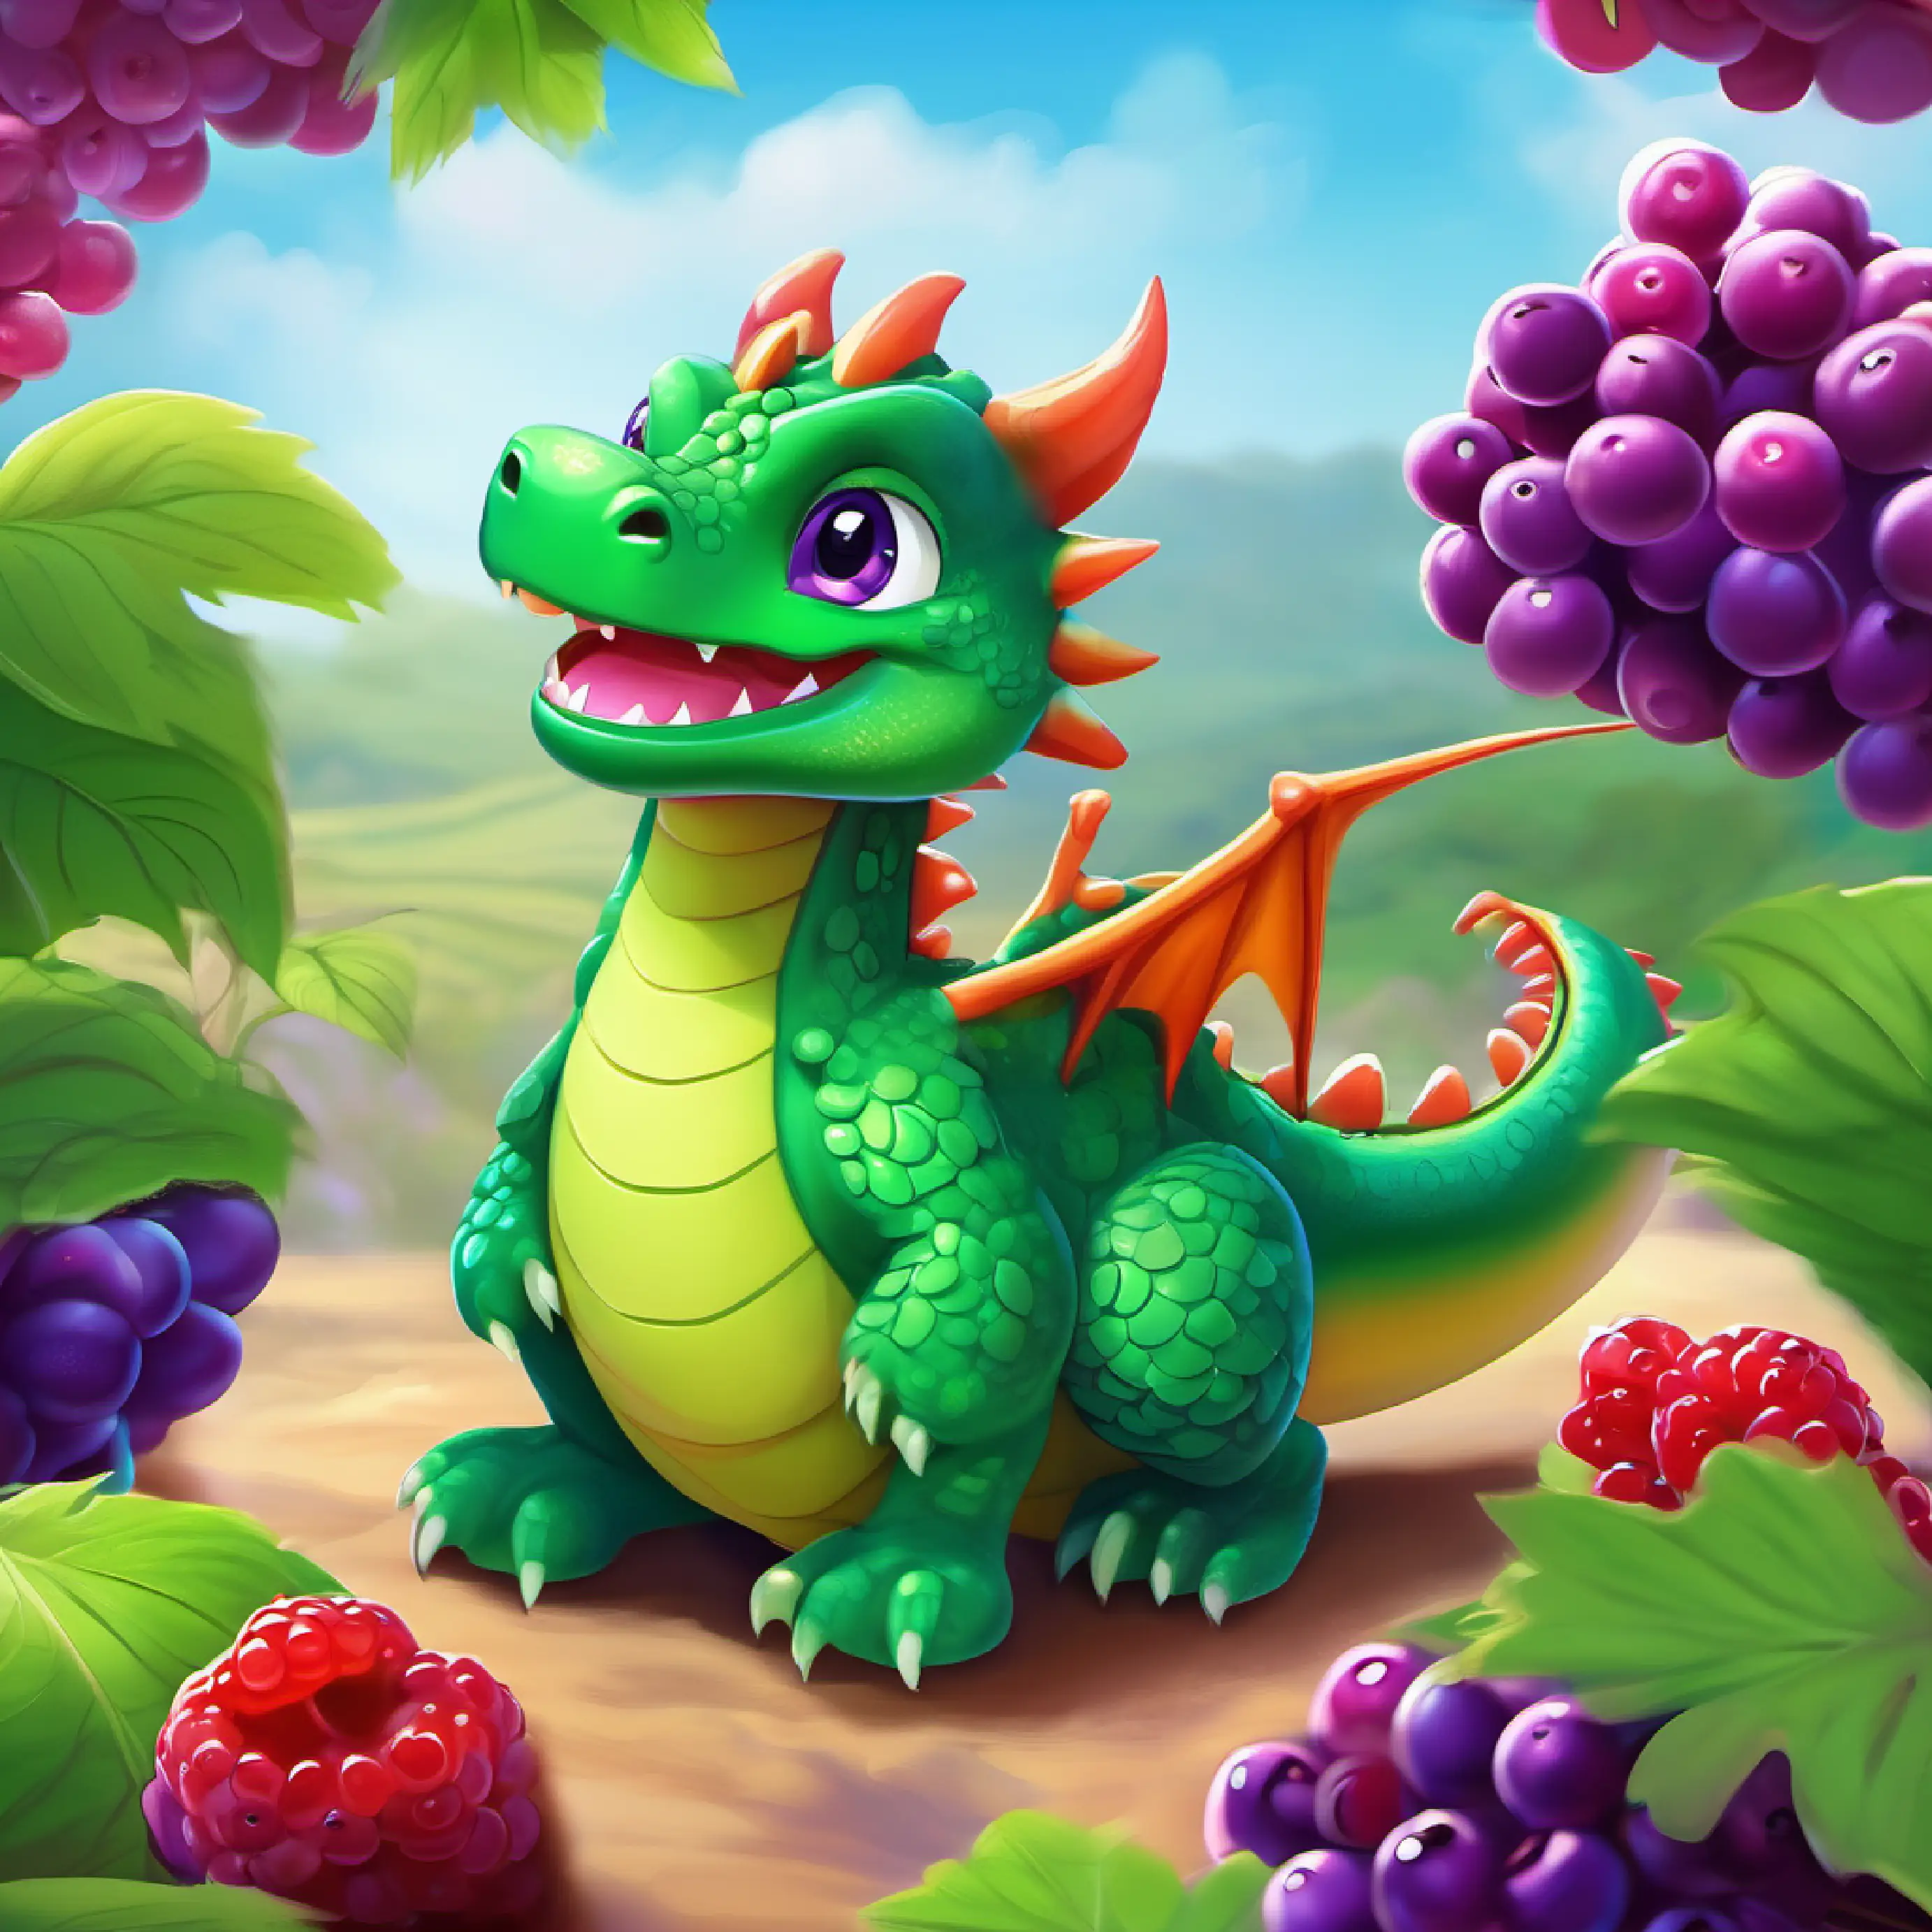 Learning subtraction with berries, Young dragon, green skin, curious purple eyes has fun.